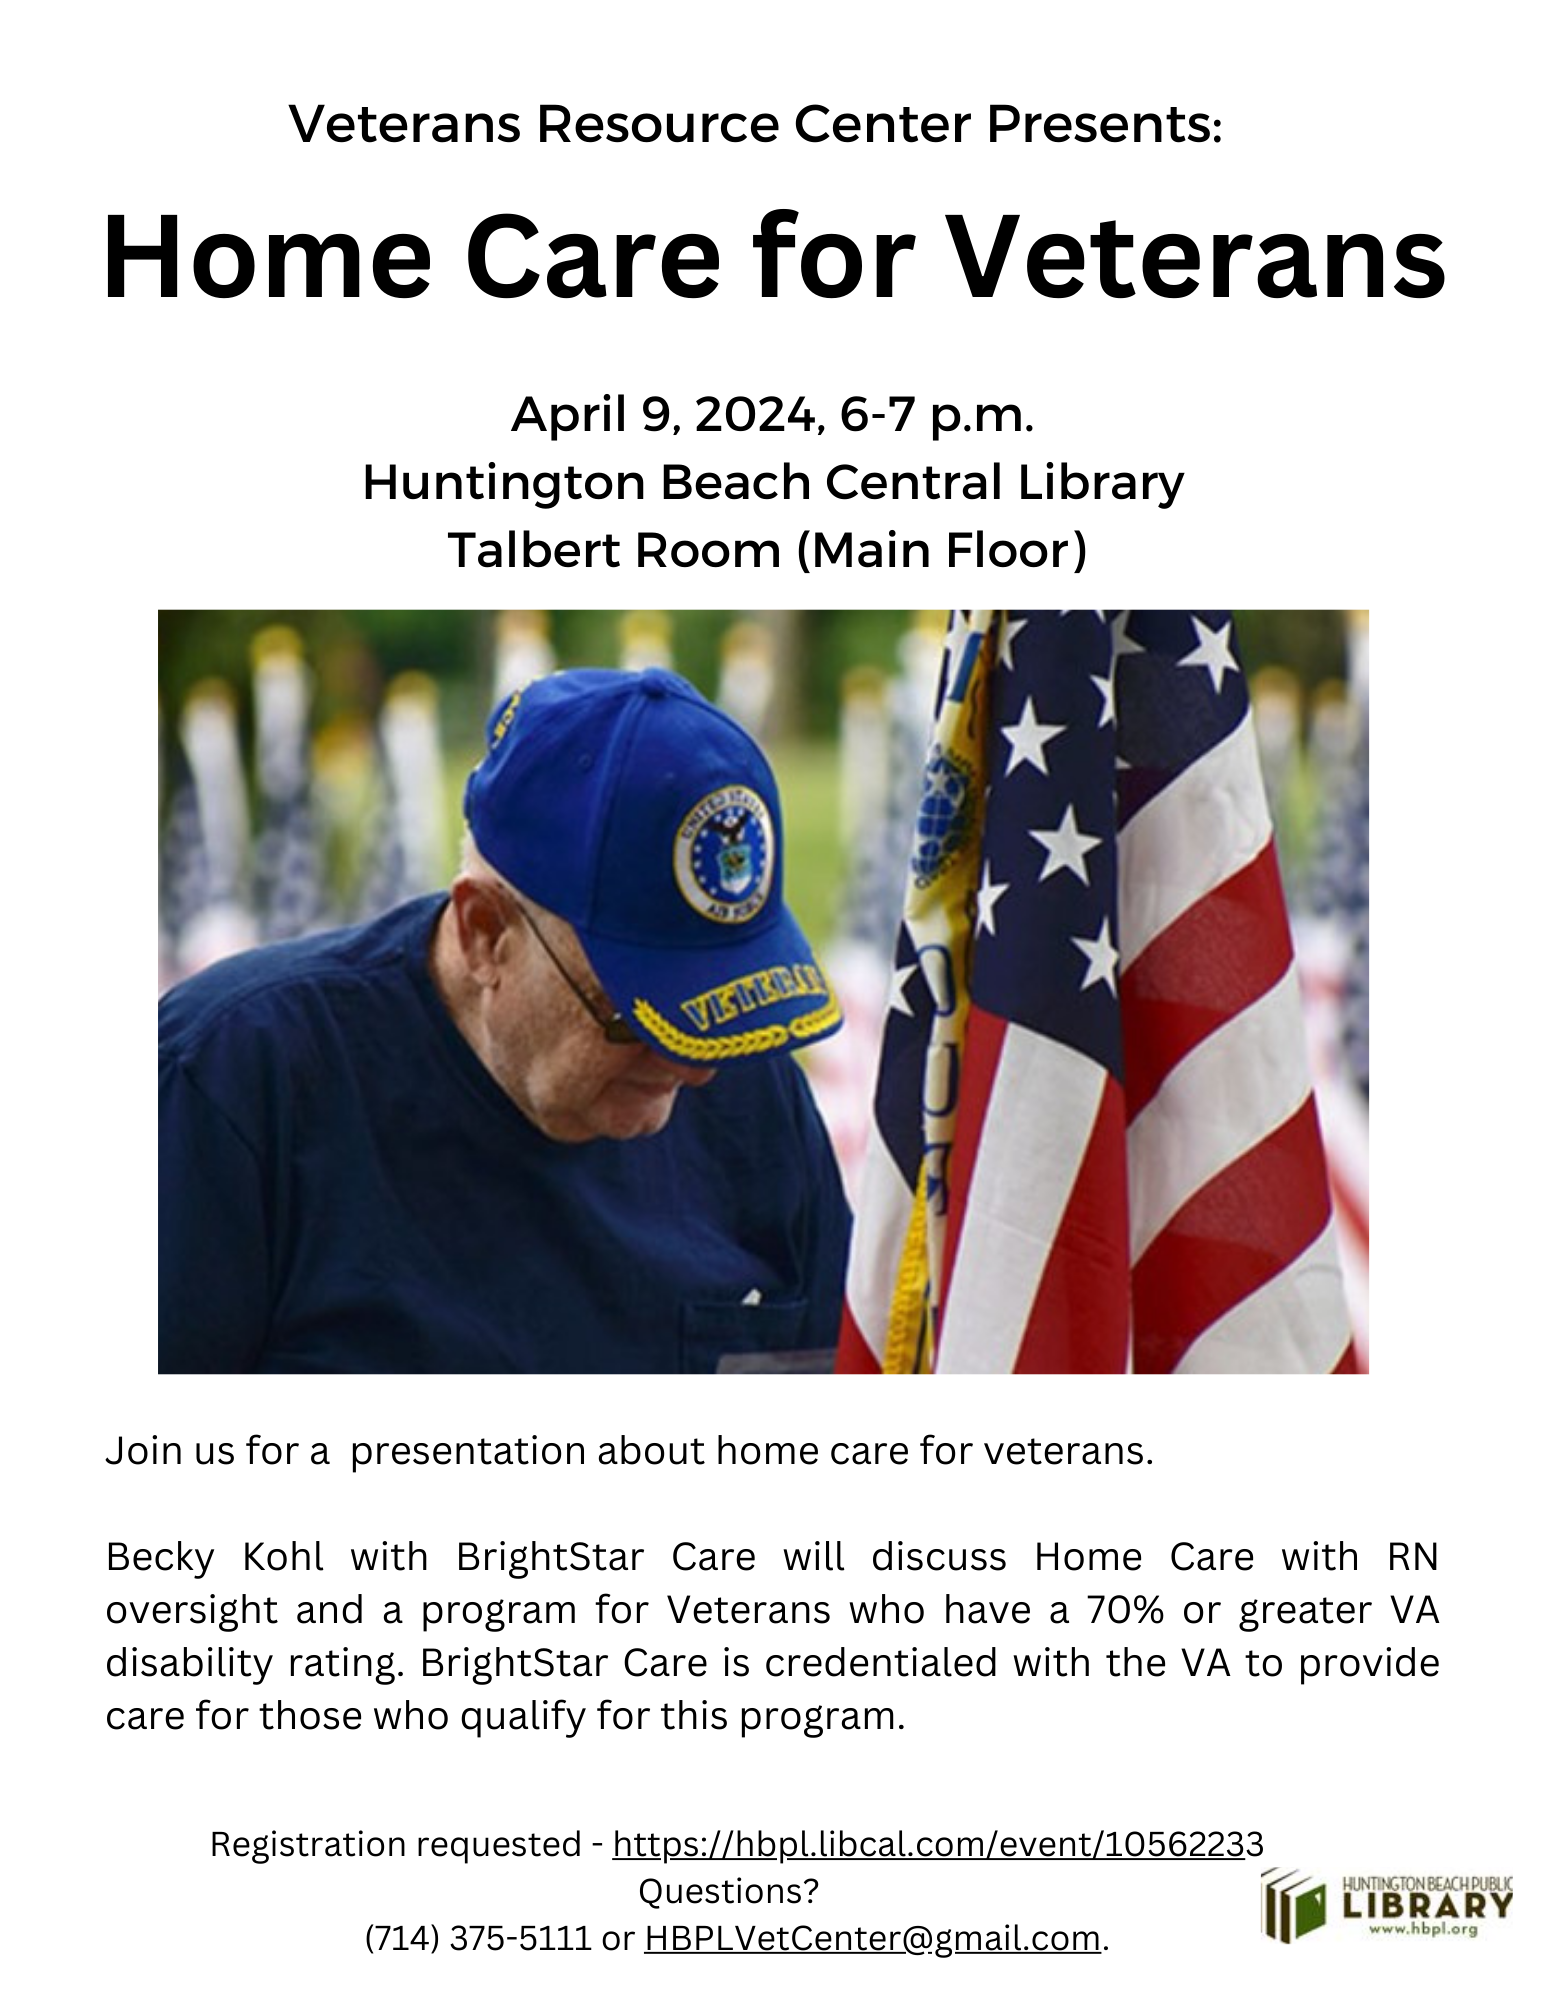 Home Care for Veterans